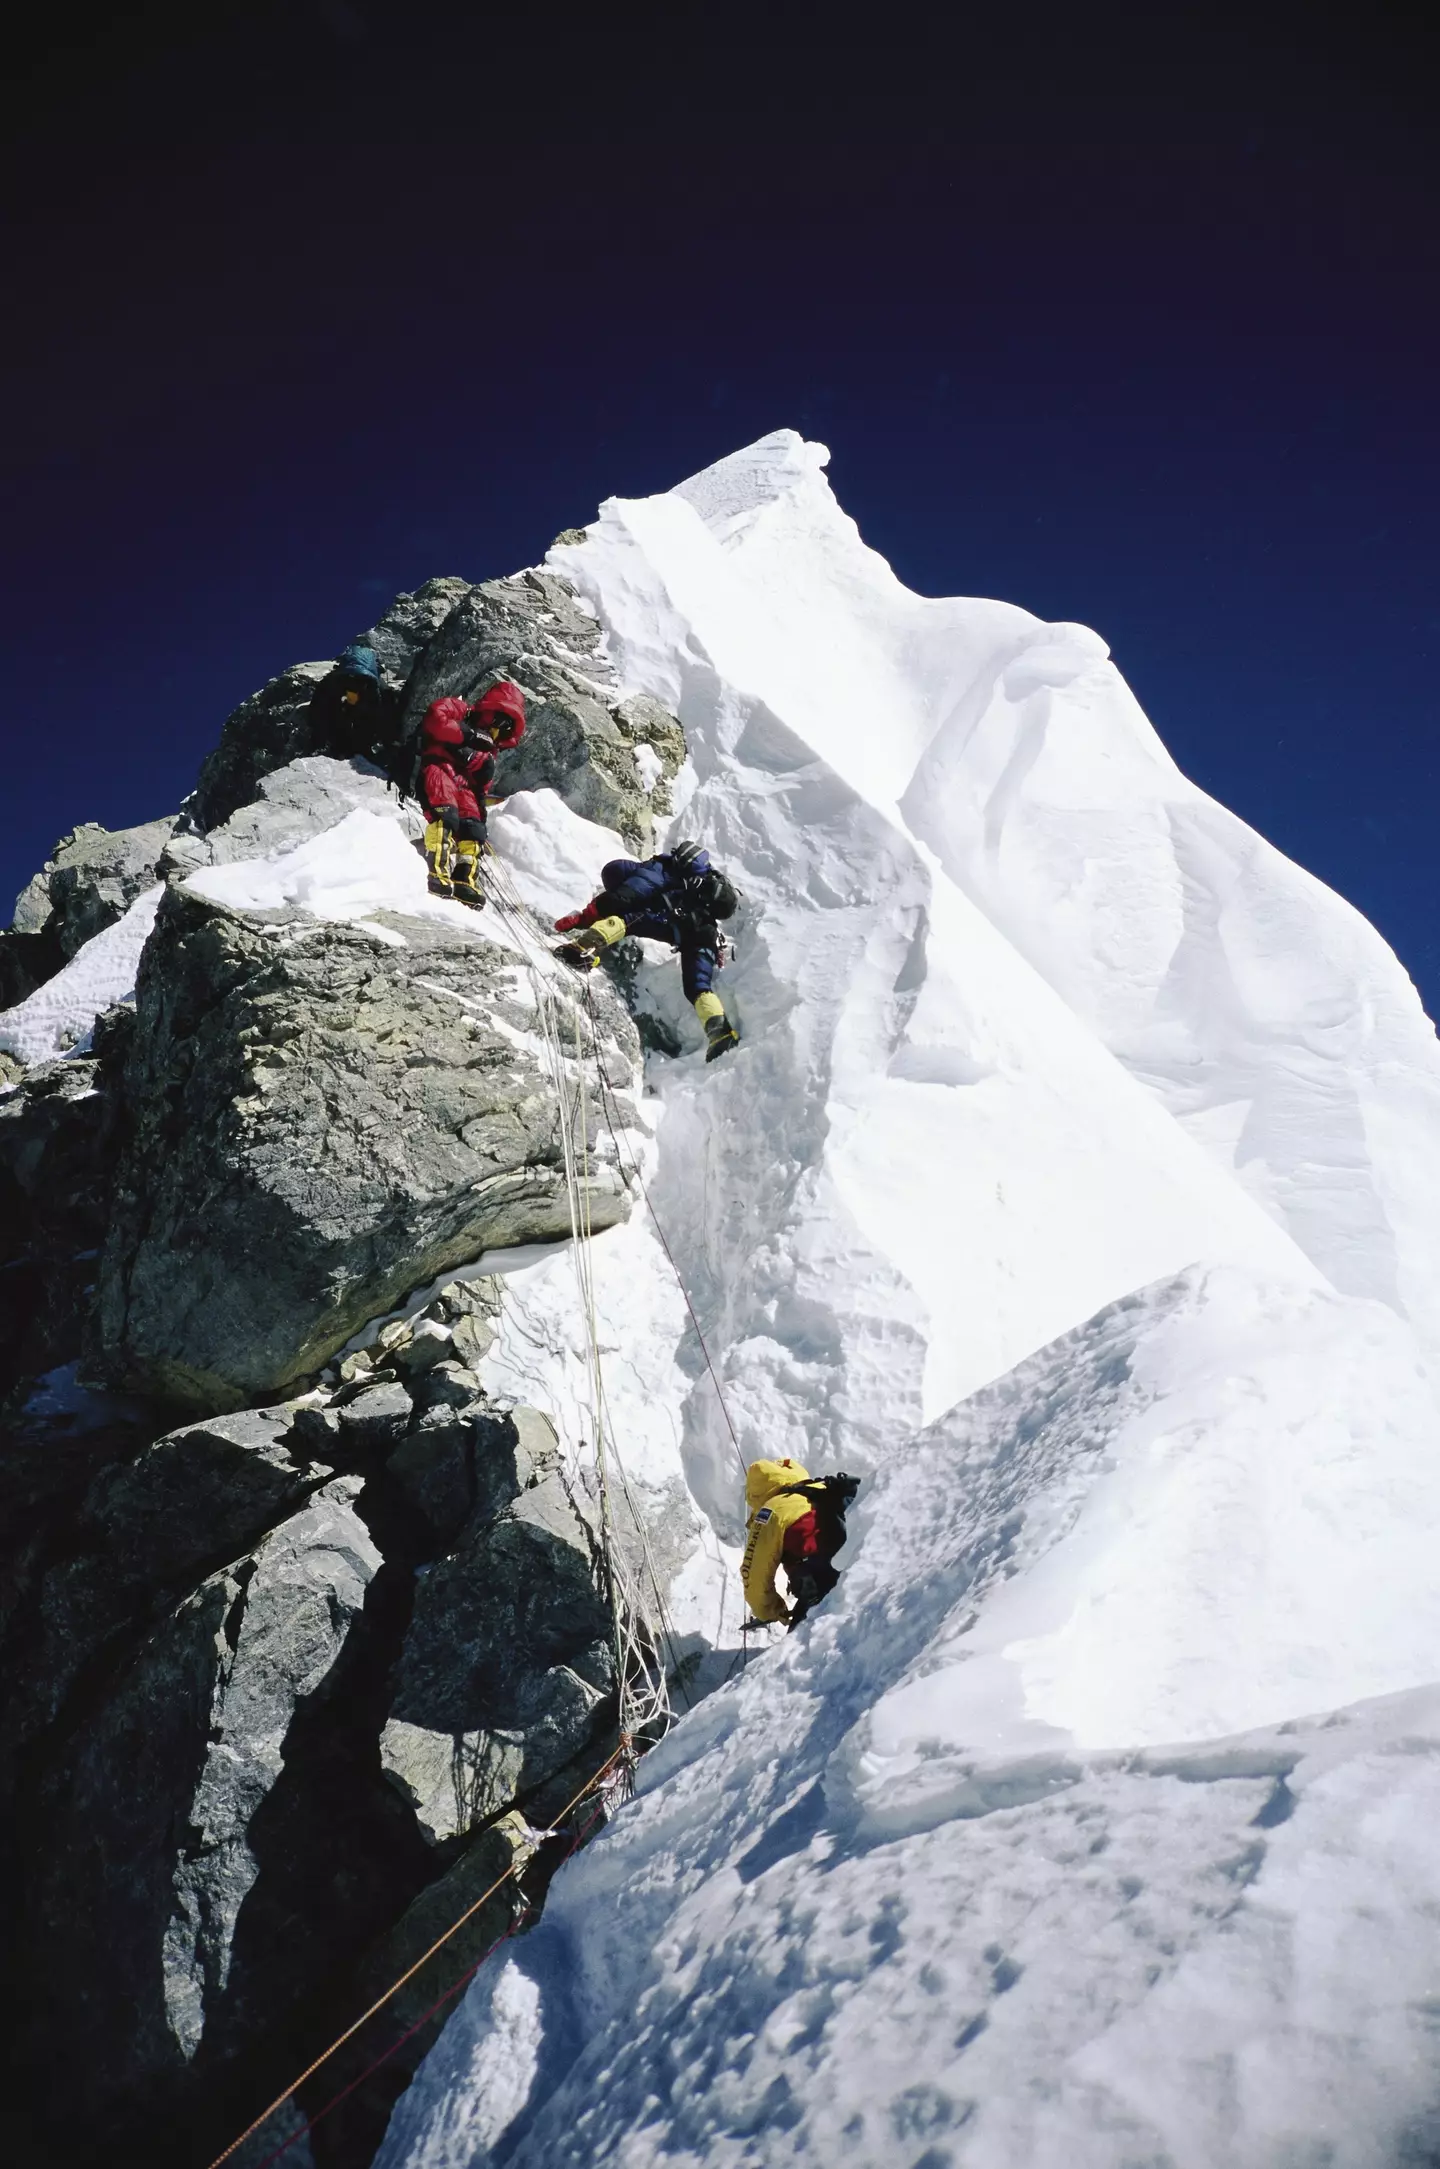 Mountaineers navigating through the Hillary Step on Mount Everest.